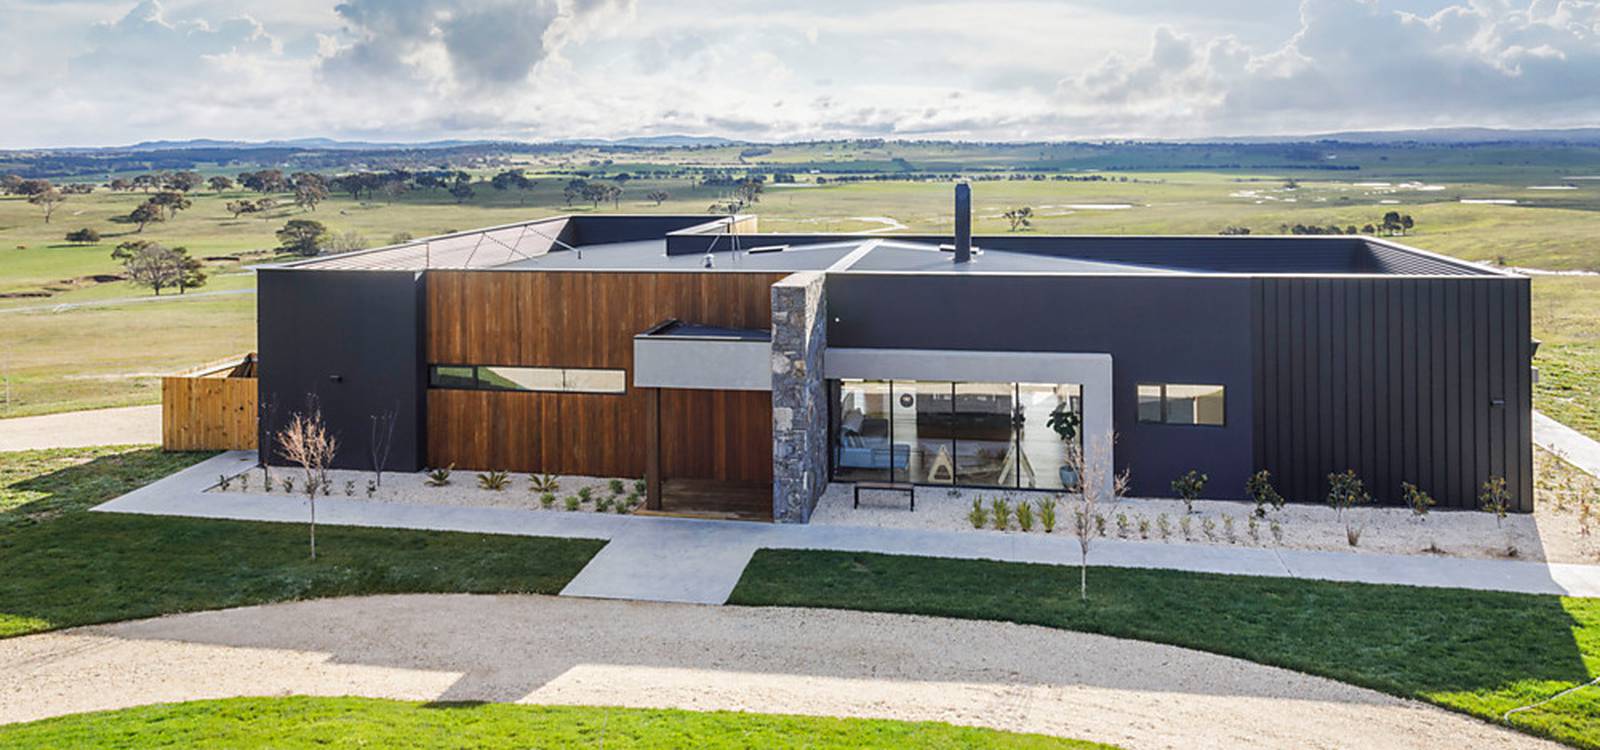 Buyers flock to ultimate rural lifestyle retreat 30 minutes from Canberra